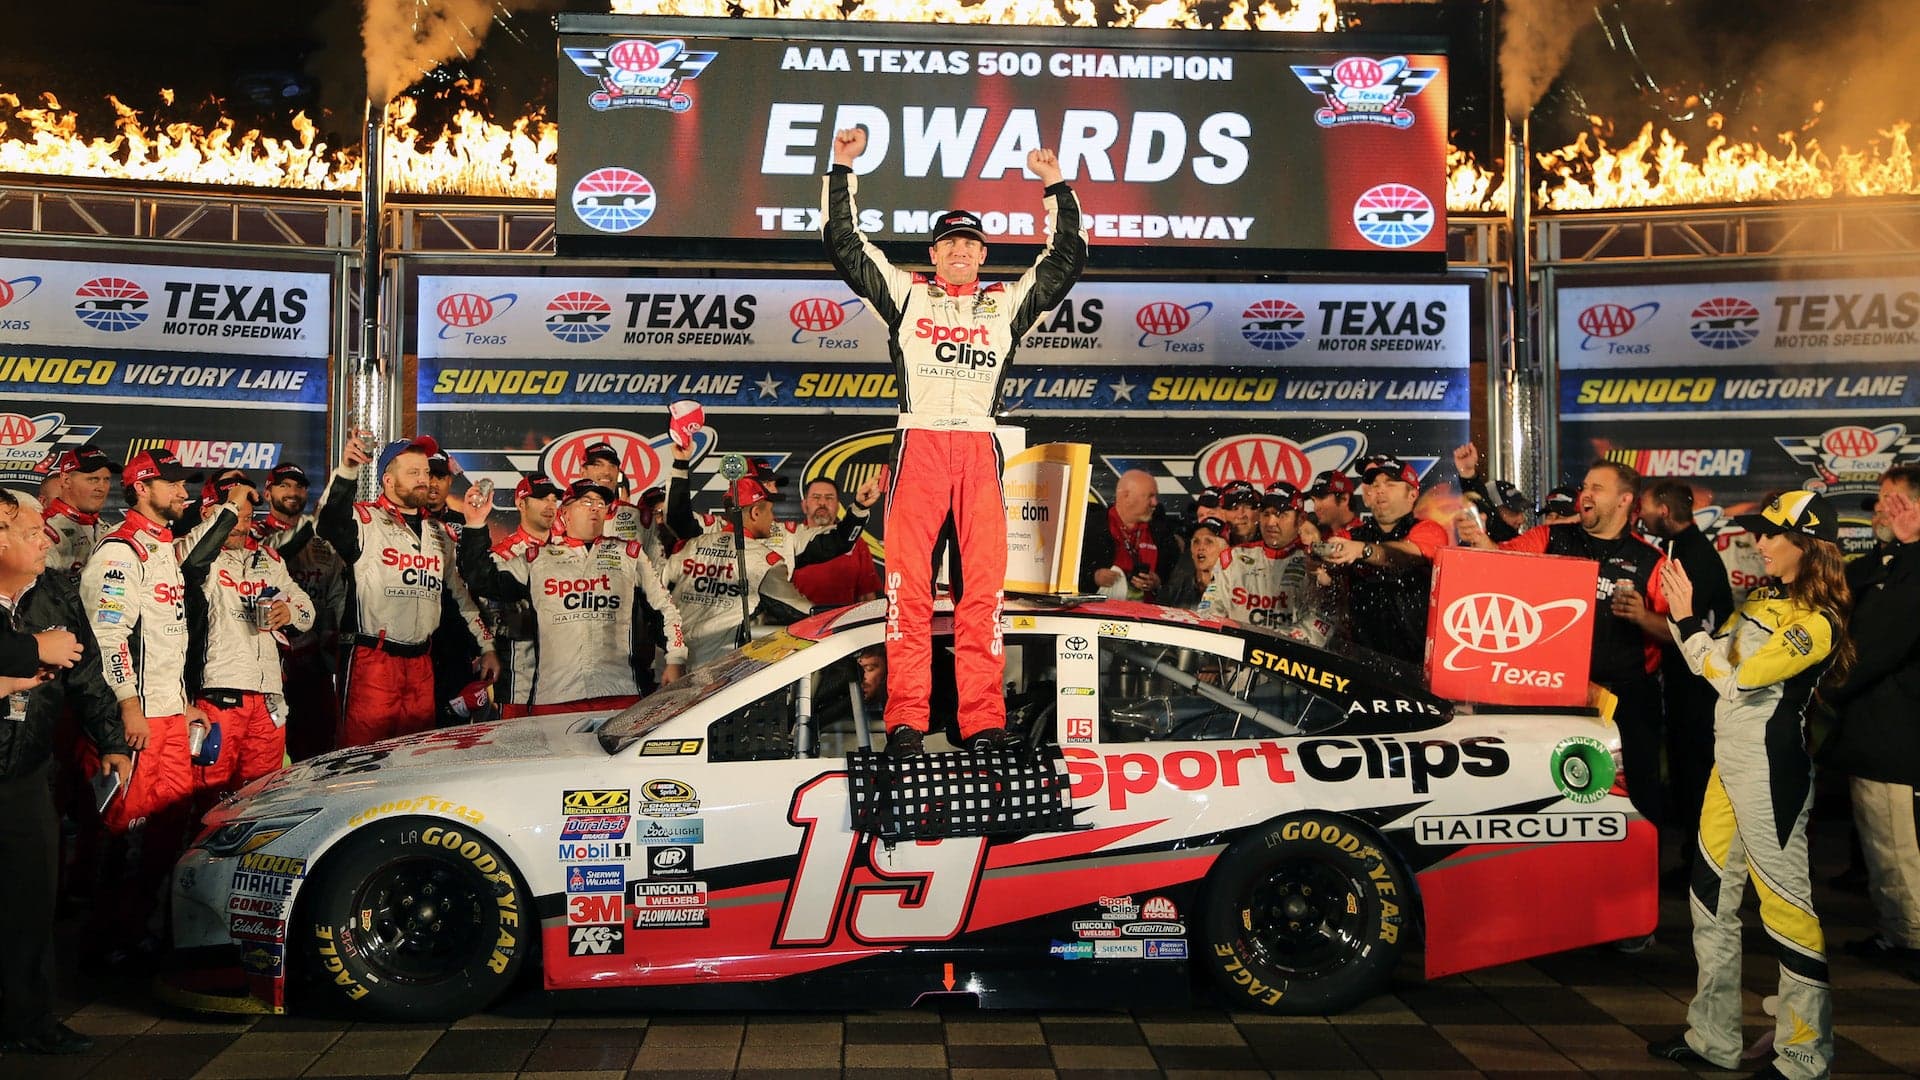 Former NASCAR Driver Carl Edwards to Be Inducted Into Texas Motor Speedway Hall of Fame